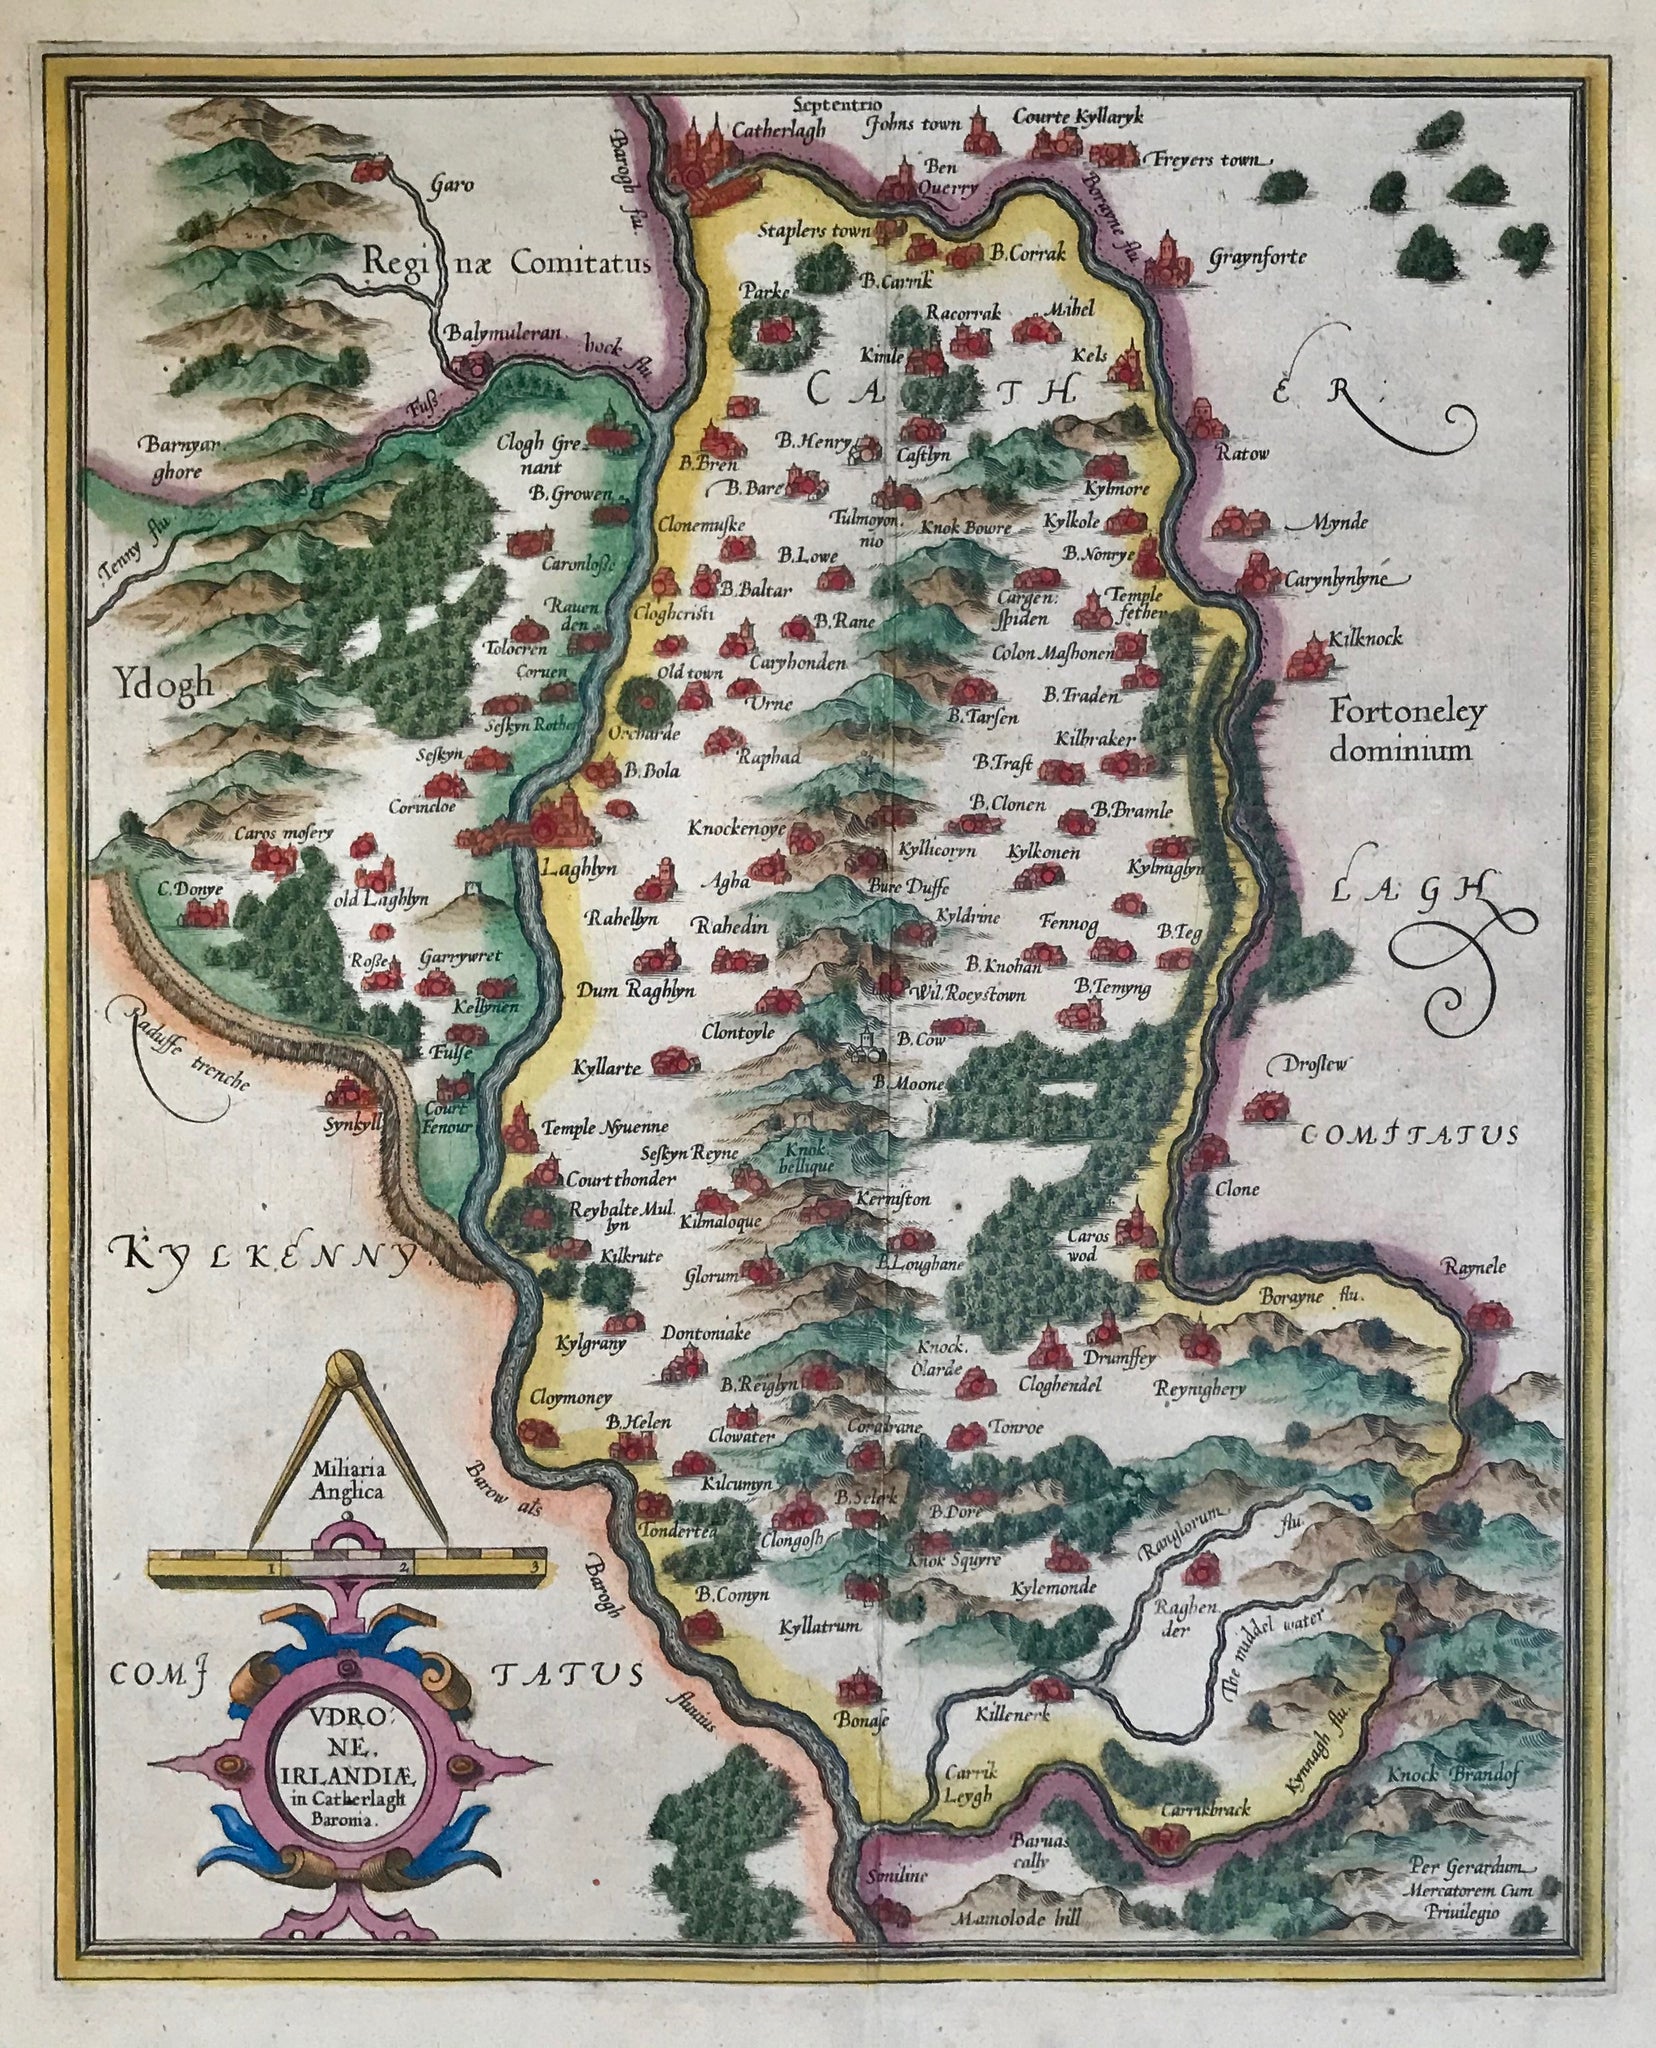 "Udrone Irlandiae in Caterlagh Baronia"  Outstandingly originally hand-colored copper etching by Gerard Mercator (1512-1594)  Map shows present day County Carlow in Leinster Province and Catherlaugh, now Carlow.  Published posthumously by Mercator's son Rumold in Duisburg, 1595